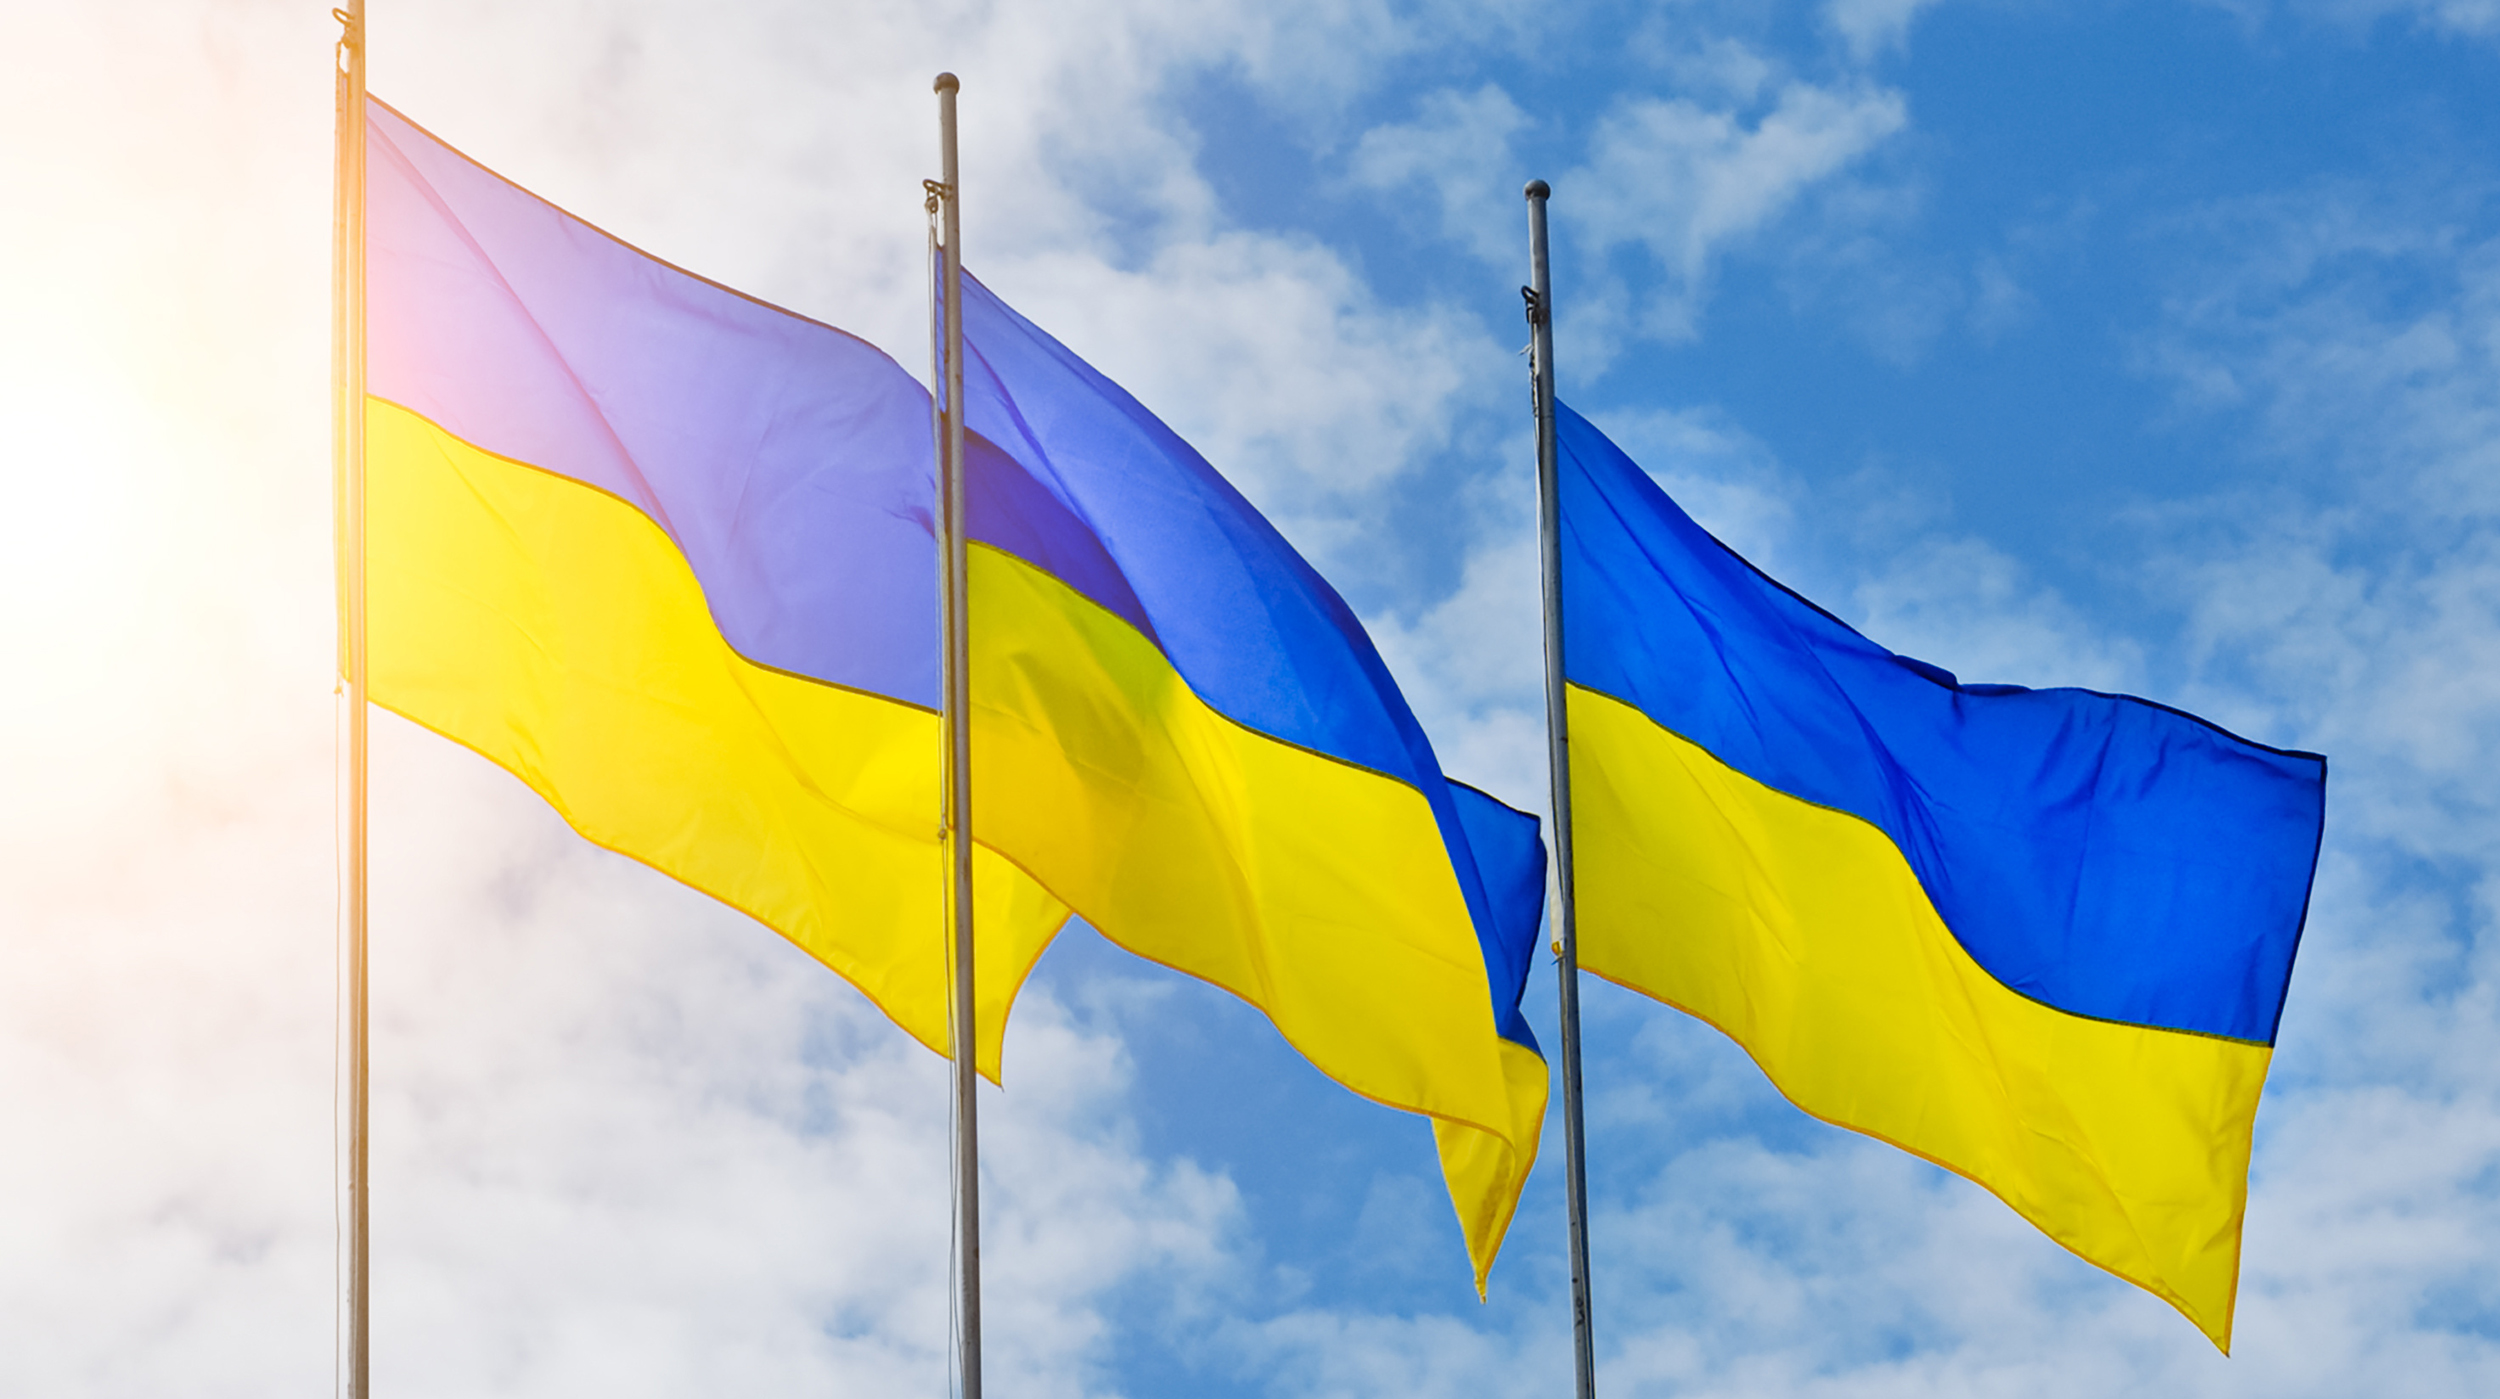 The Academy’s support for Ukraine